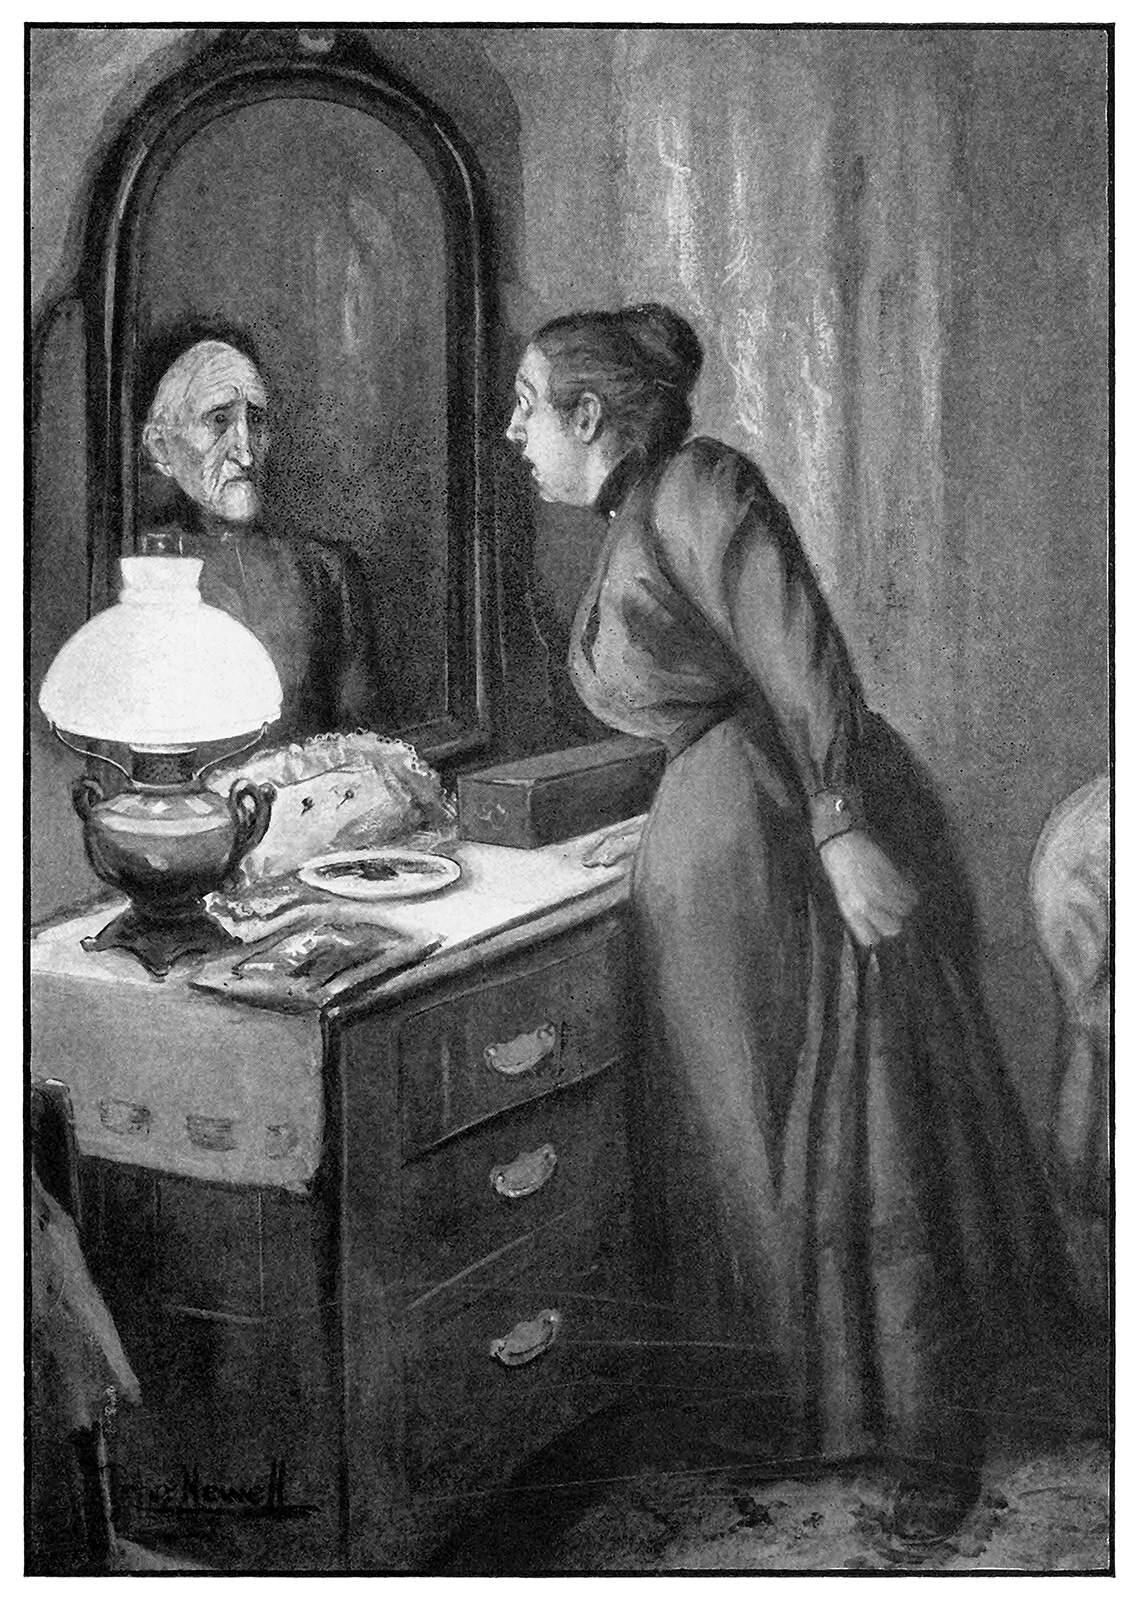 A woman looks into a mirror to see a ghostly face look back